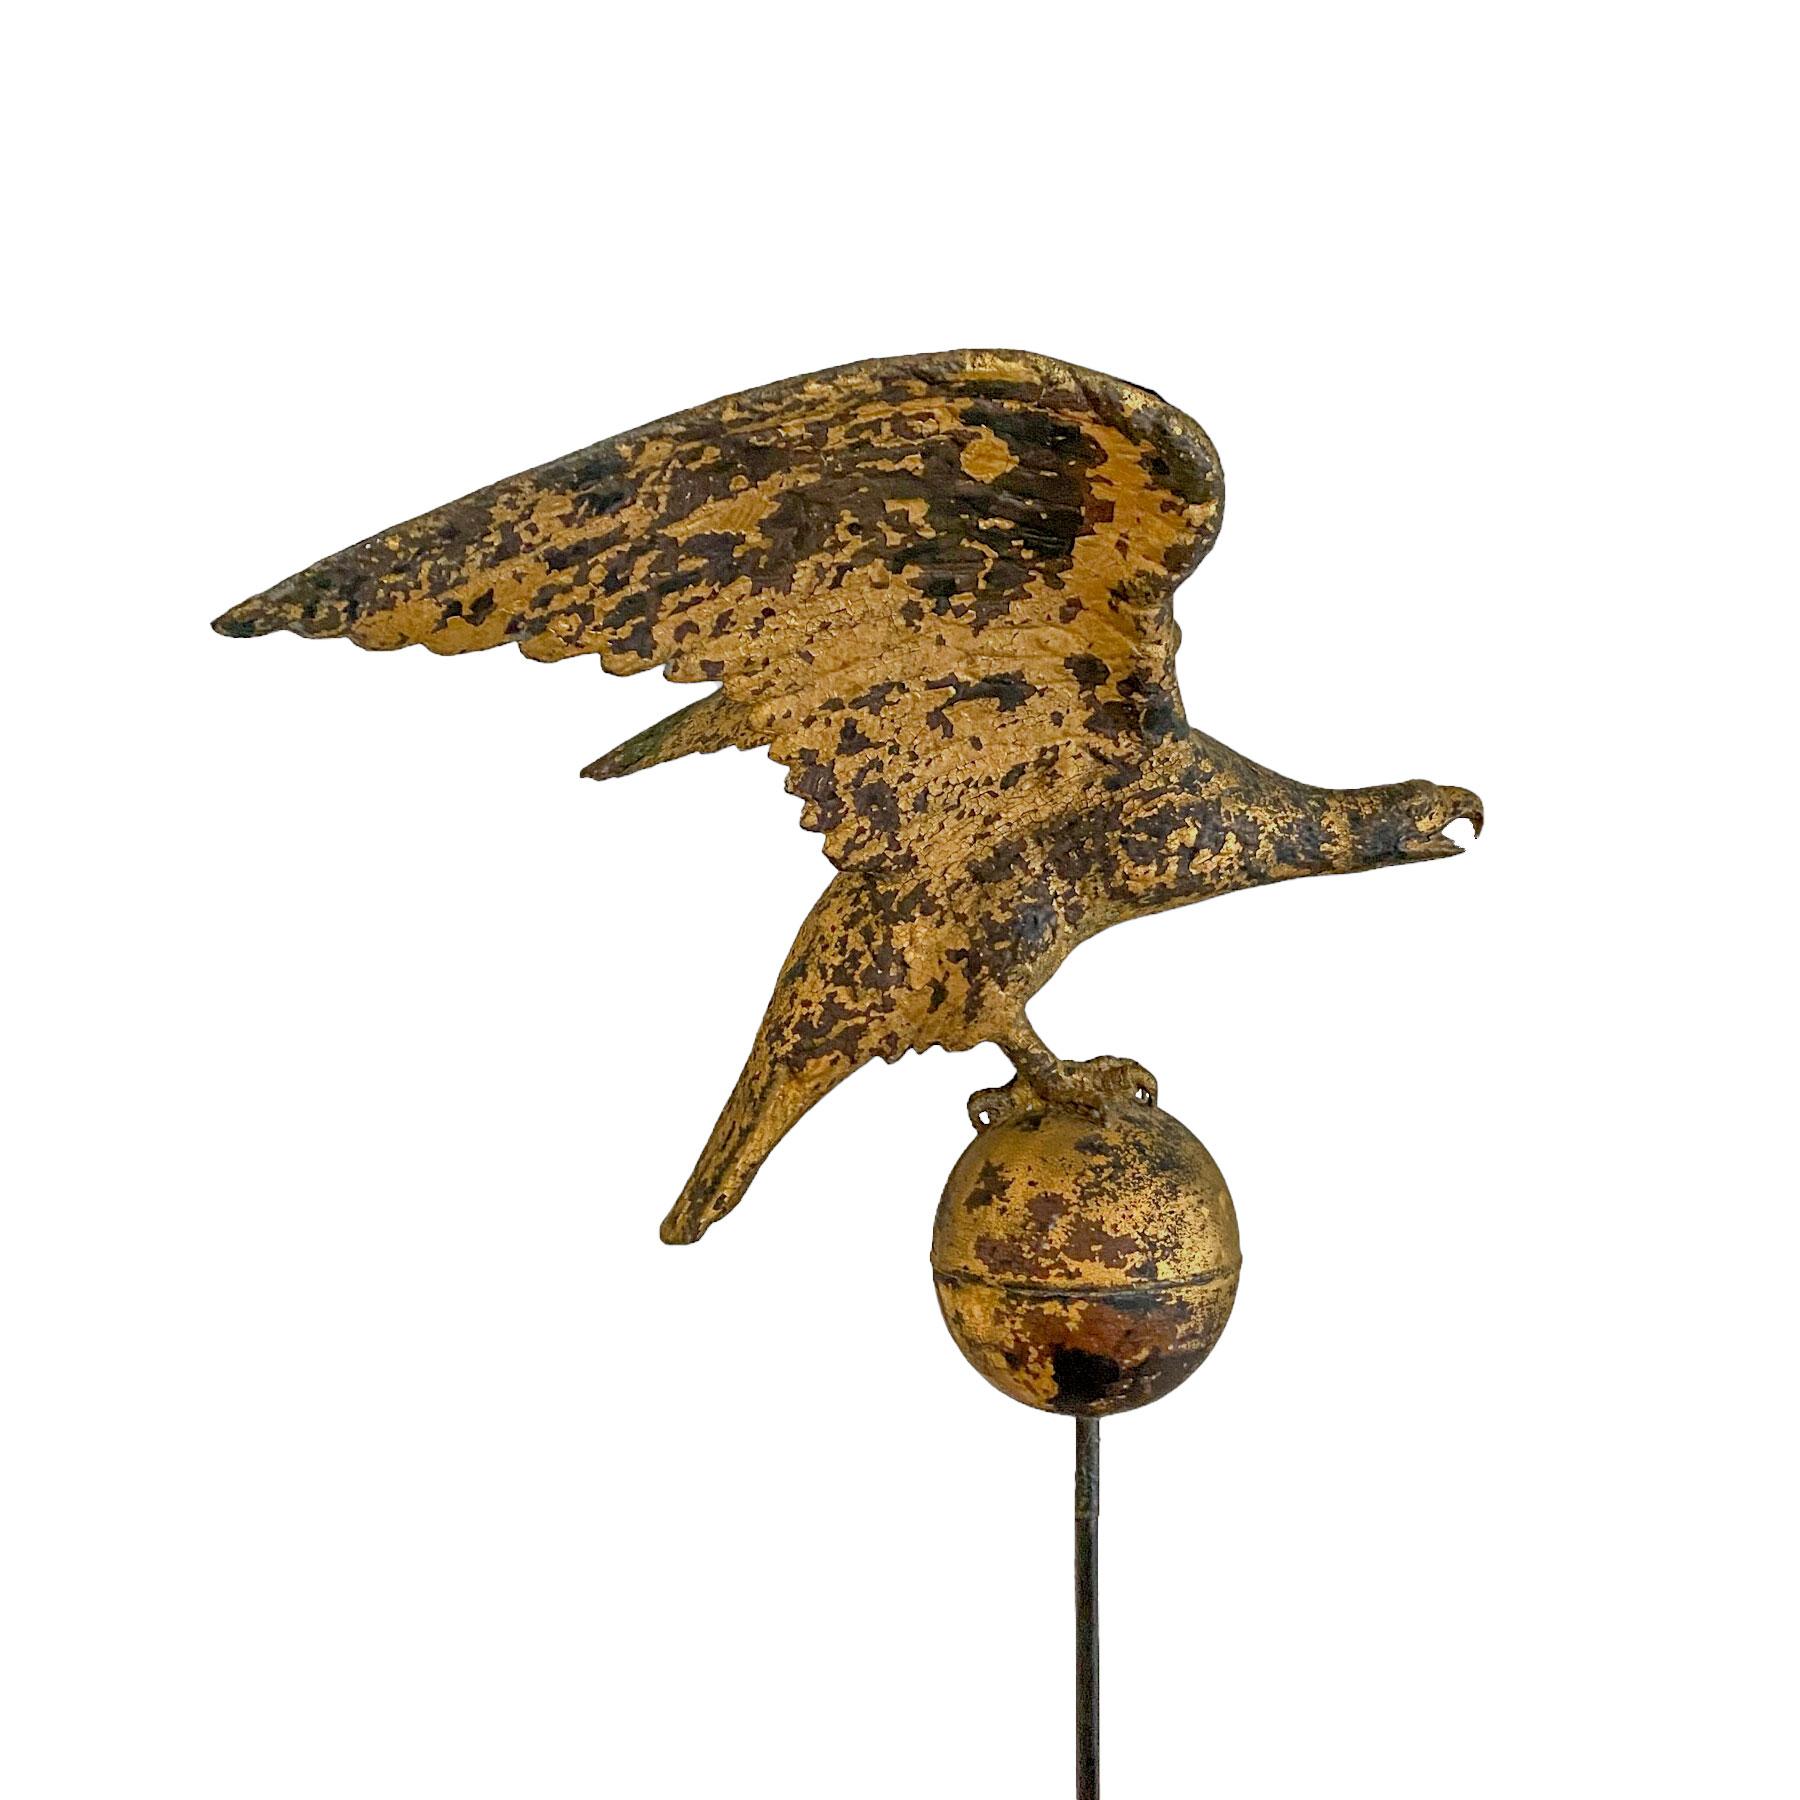 Full body molded copper spread wing eagle with cast zinc talons perched on a copper sphere. Great proportions with outstretched wings, showing wonderful detailing to the body and wings, mounted on a tall museum quality stand.
Attributed to Cushing